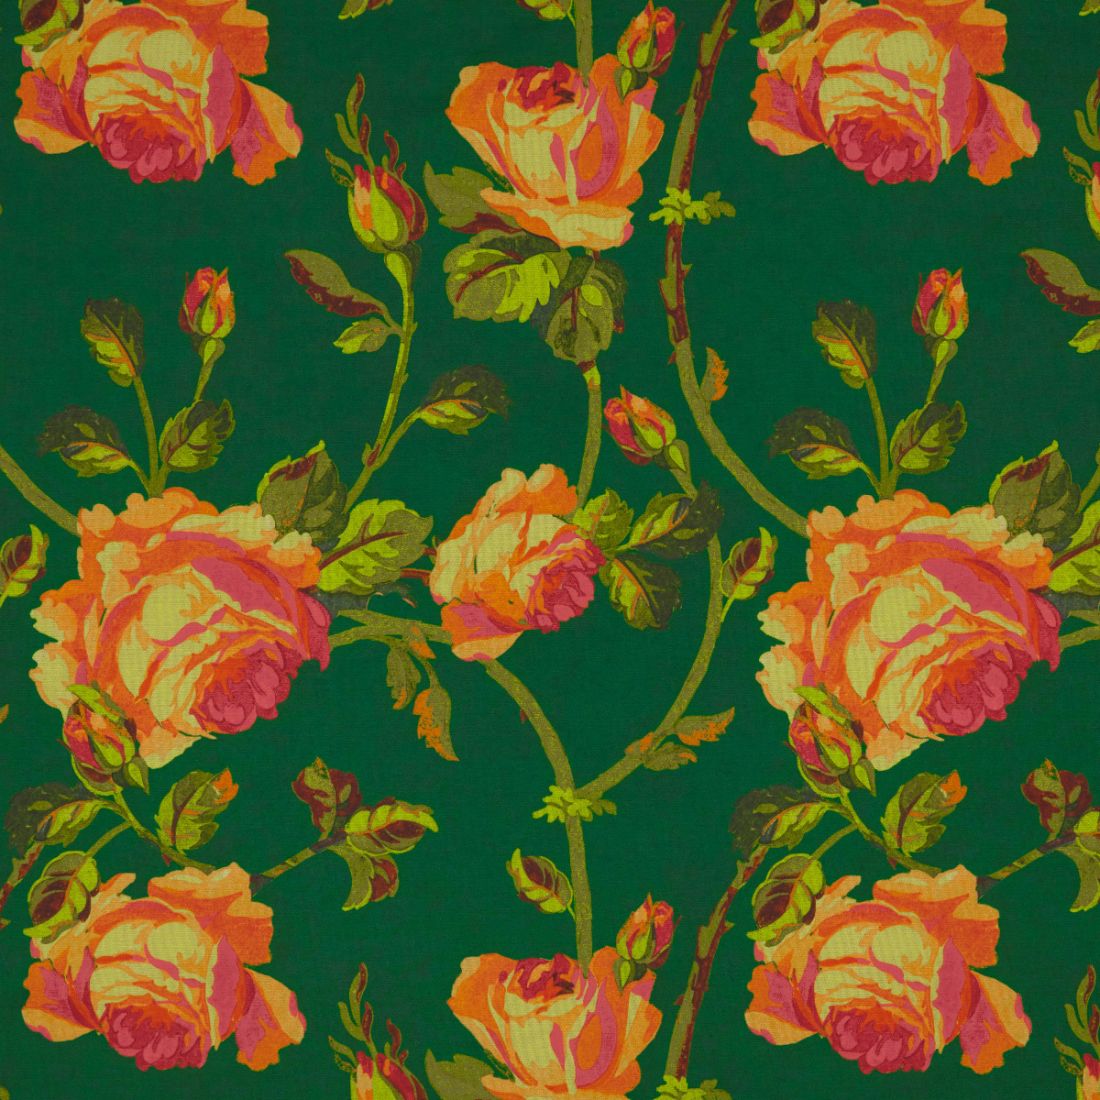 Oriental Floral Fabric